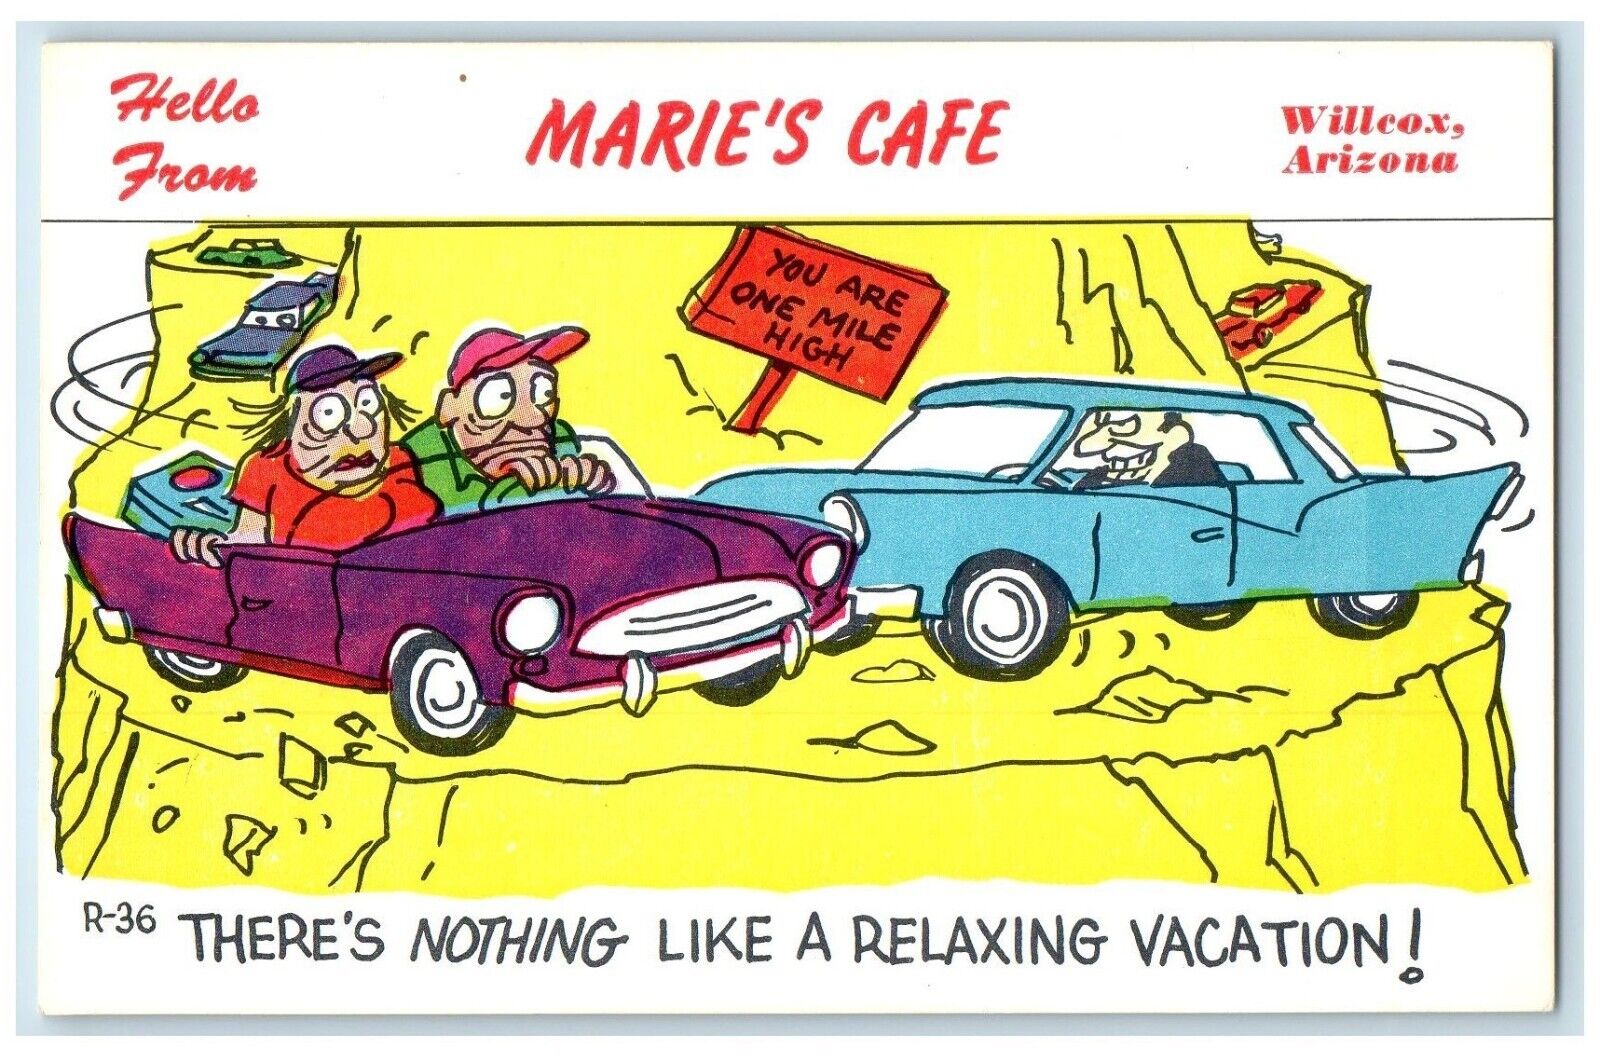 Hello From Marie's Cafe Willcox Arizona AZ, Cars You Are One Mile High Postcard